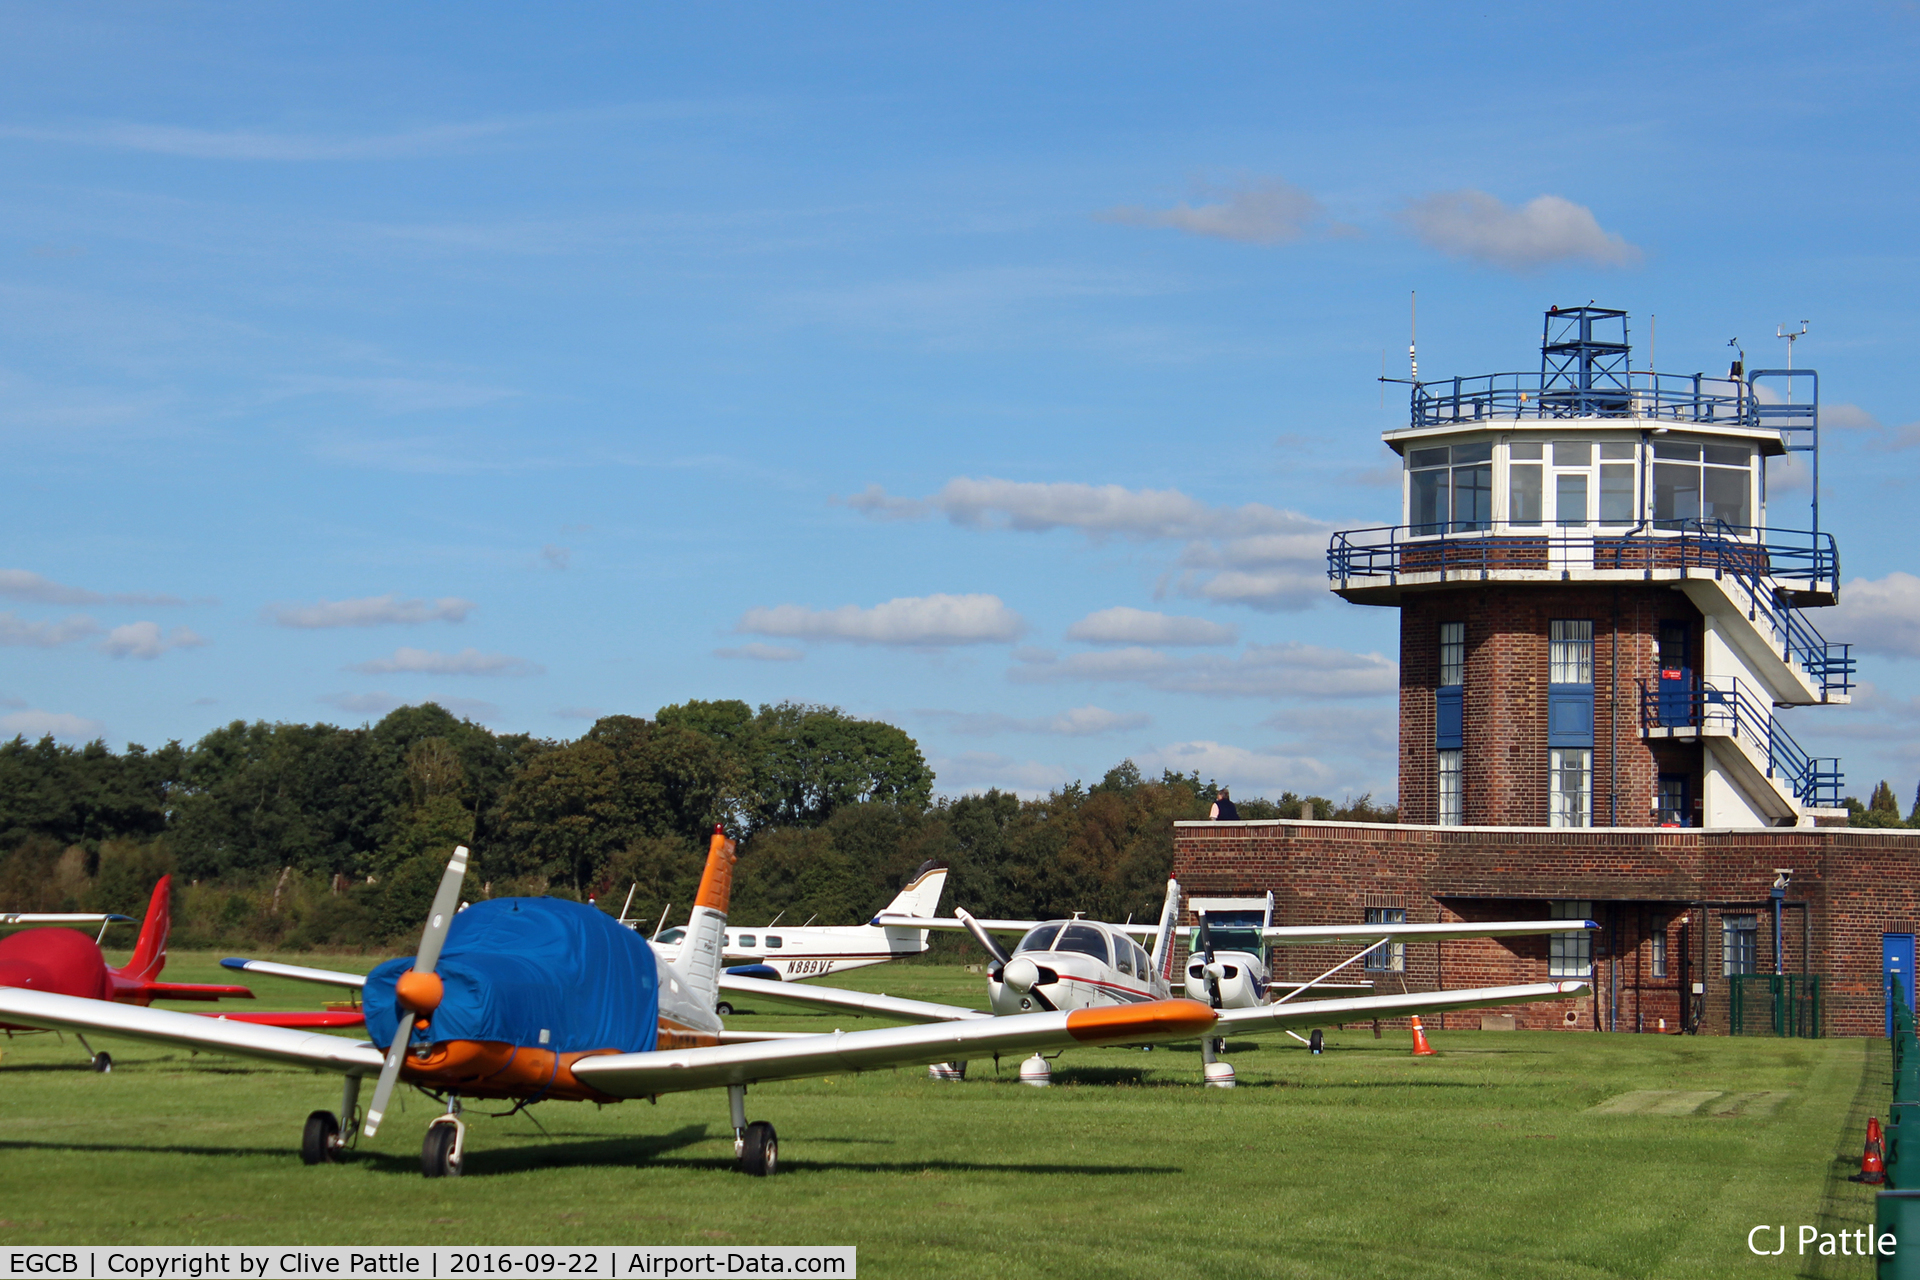 City Airport Manchester, Manchester, England United Kingdom (EGCB) - Tower and GA park at Manchester City Airport, Barton EGCB